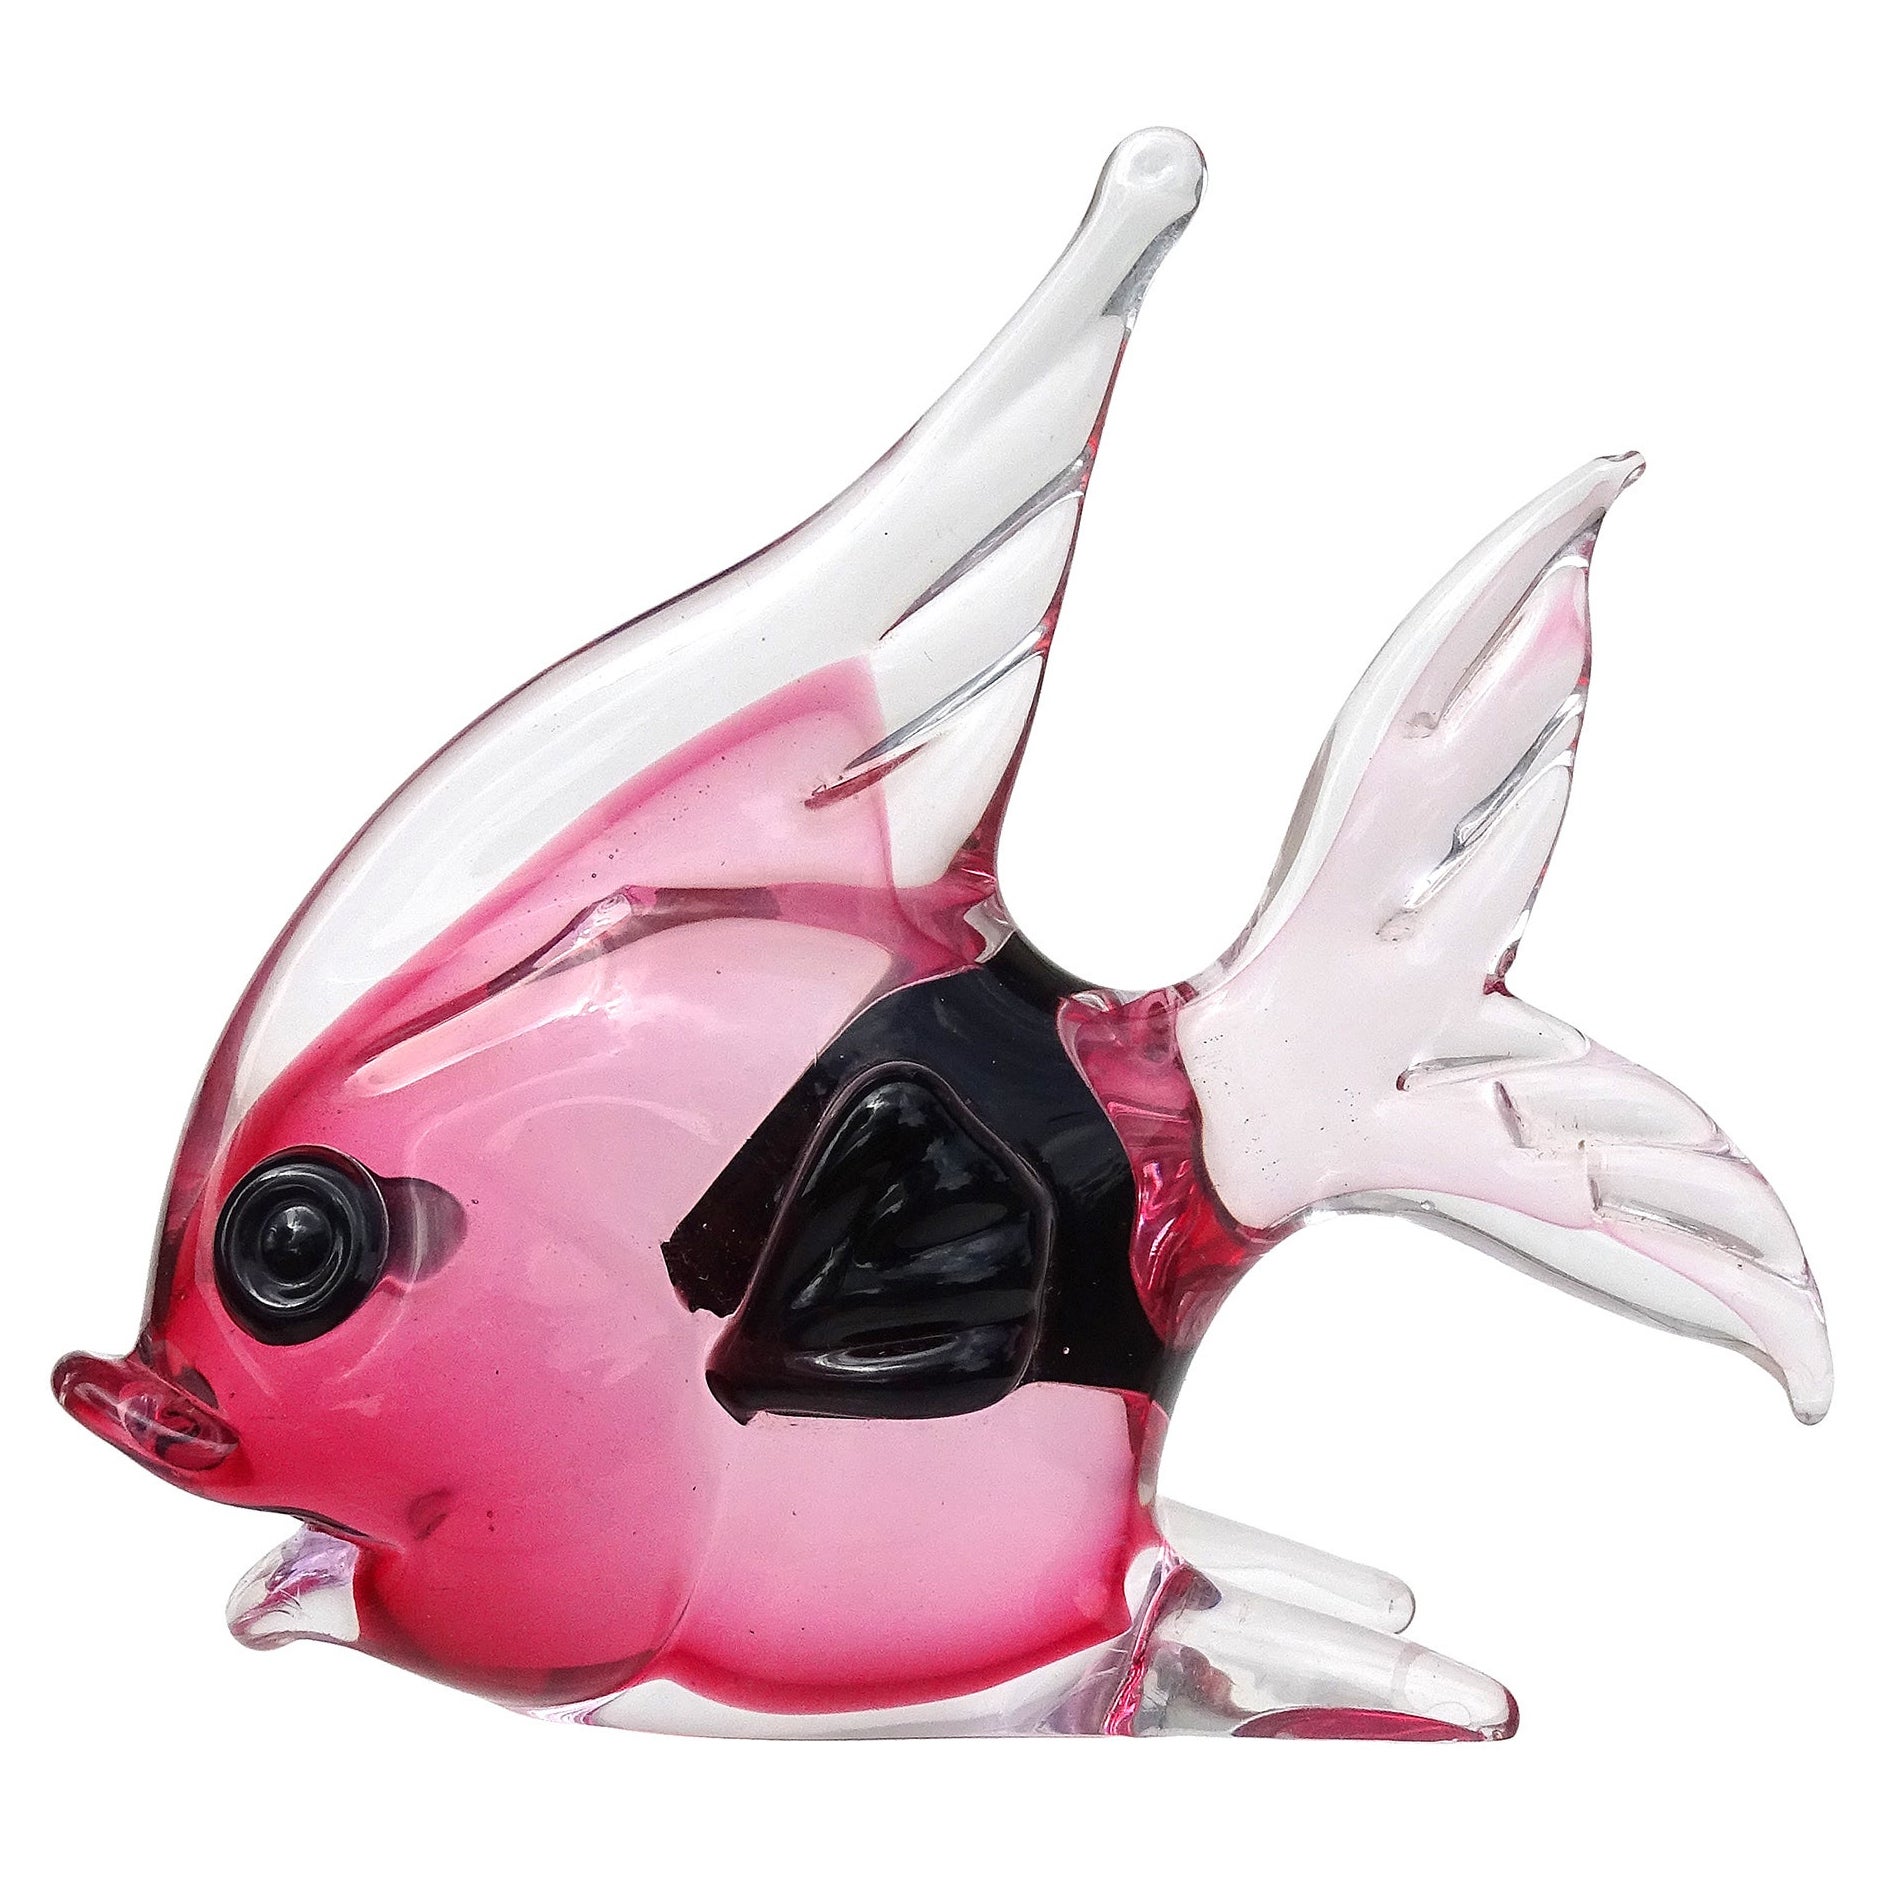 Seguso Murano Sommerso Pink Black Italian Art Glass Fish Figurine Paperweight For Sale